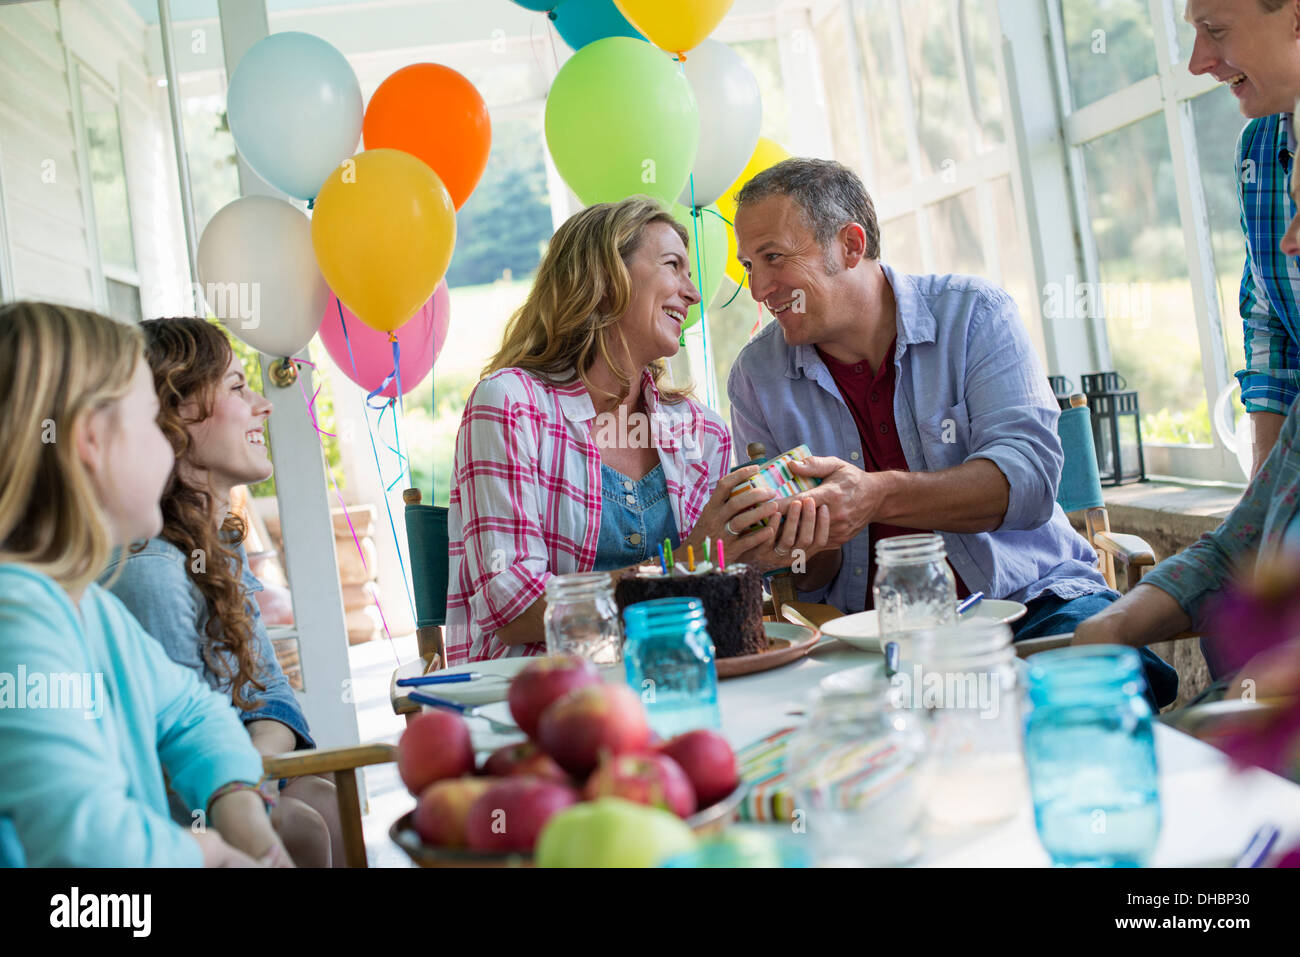 A birthday party in a farmhouse kitchen. A group of adults and children gathered around a chocolate cake. Stock Photo